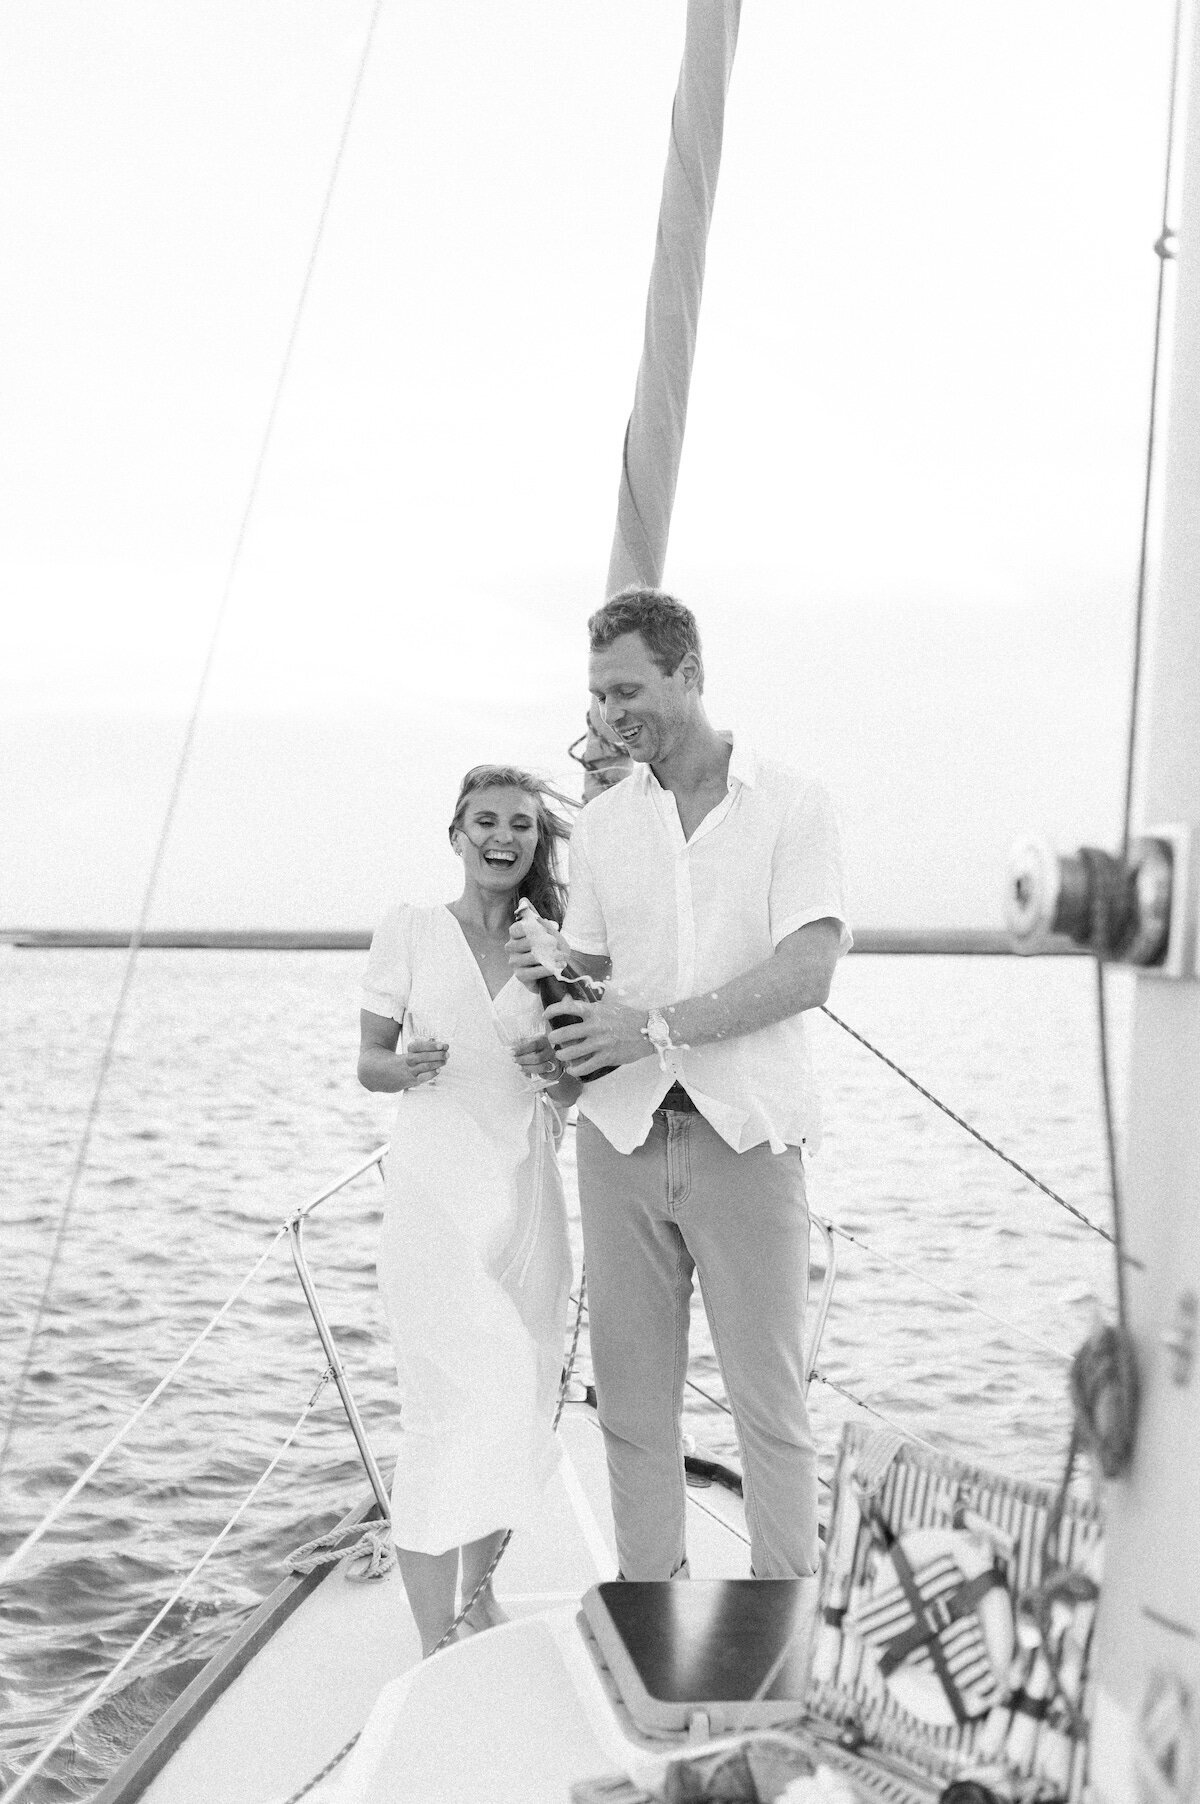 Capturing the magic of your love story in far-off destinations, our luxury engagement sessions combine adventure and elegance. Our editorial lens weaves together candid moments and curated beauty.